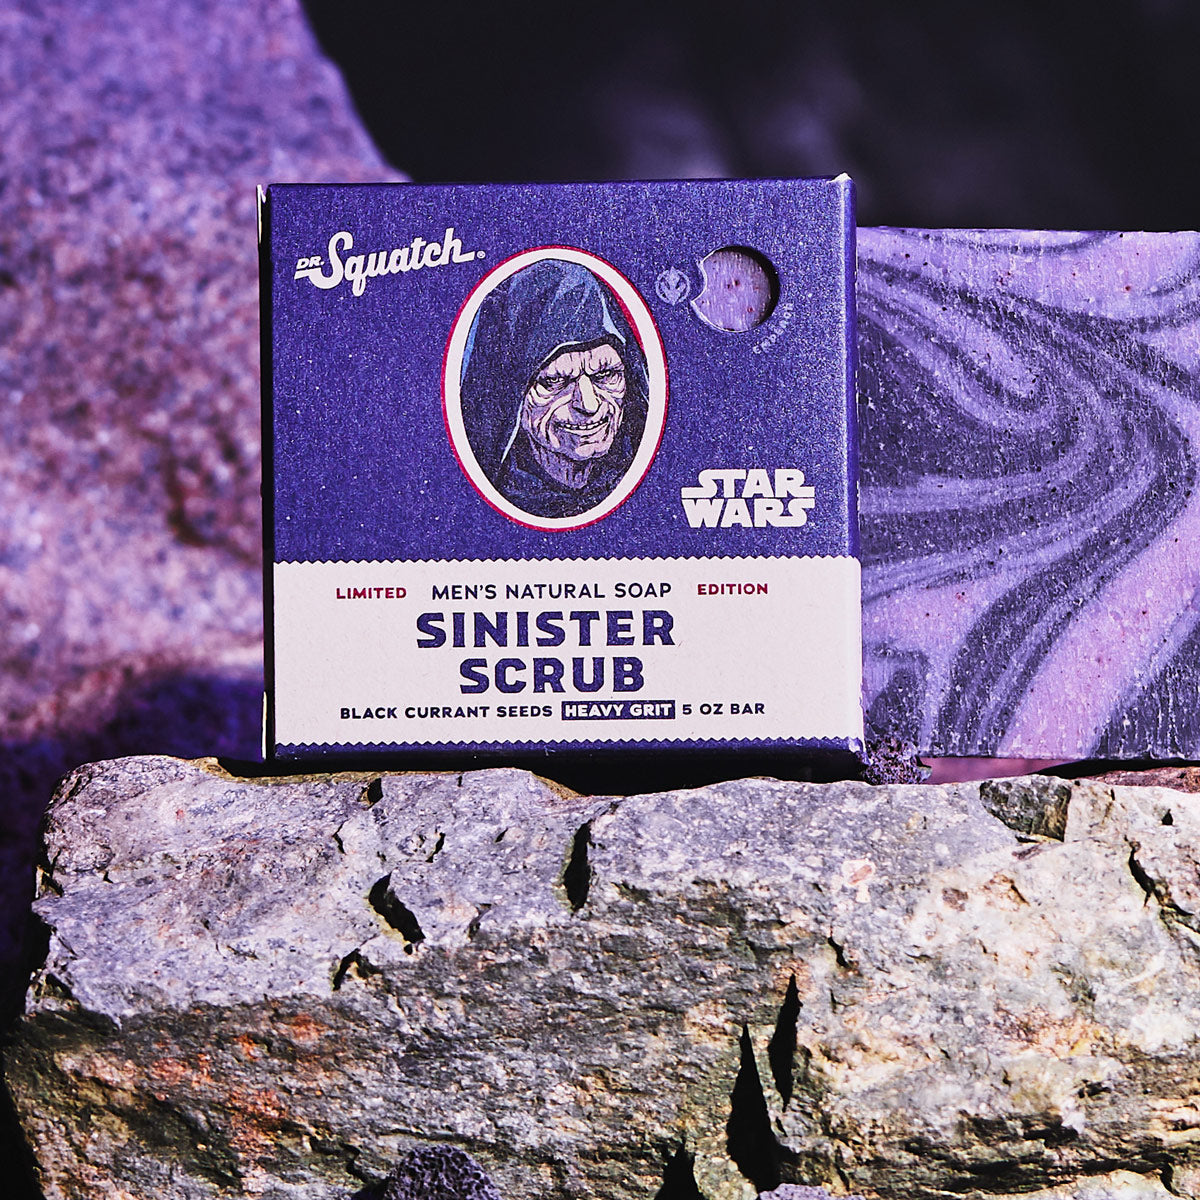 Gotta Have It!: Dr. Squatch – The Star Wars Collection Review